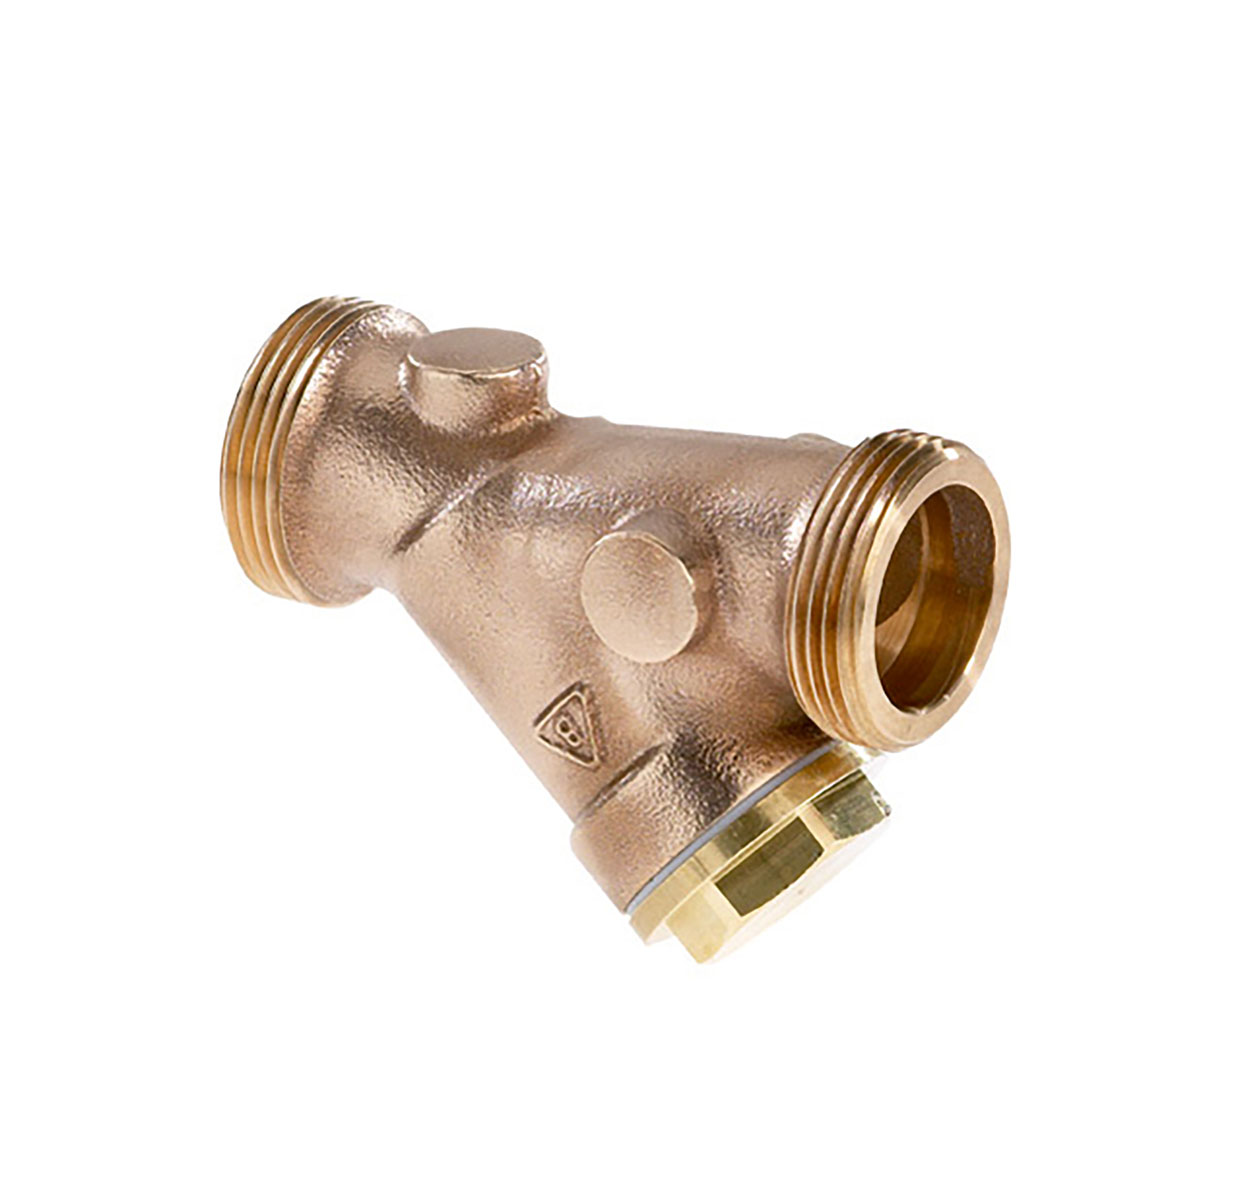 2452200 - Red-brass Strainer Strainer with PTFE-sealing (Teflon)